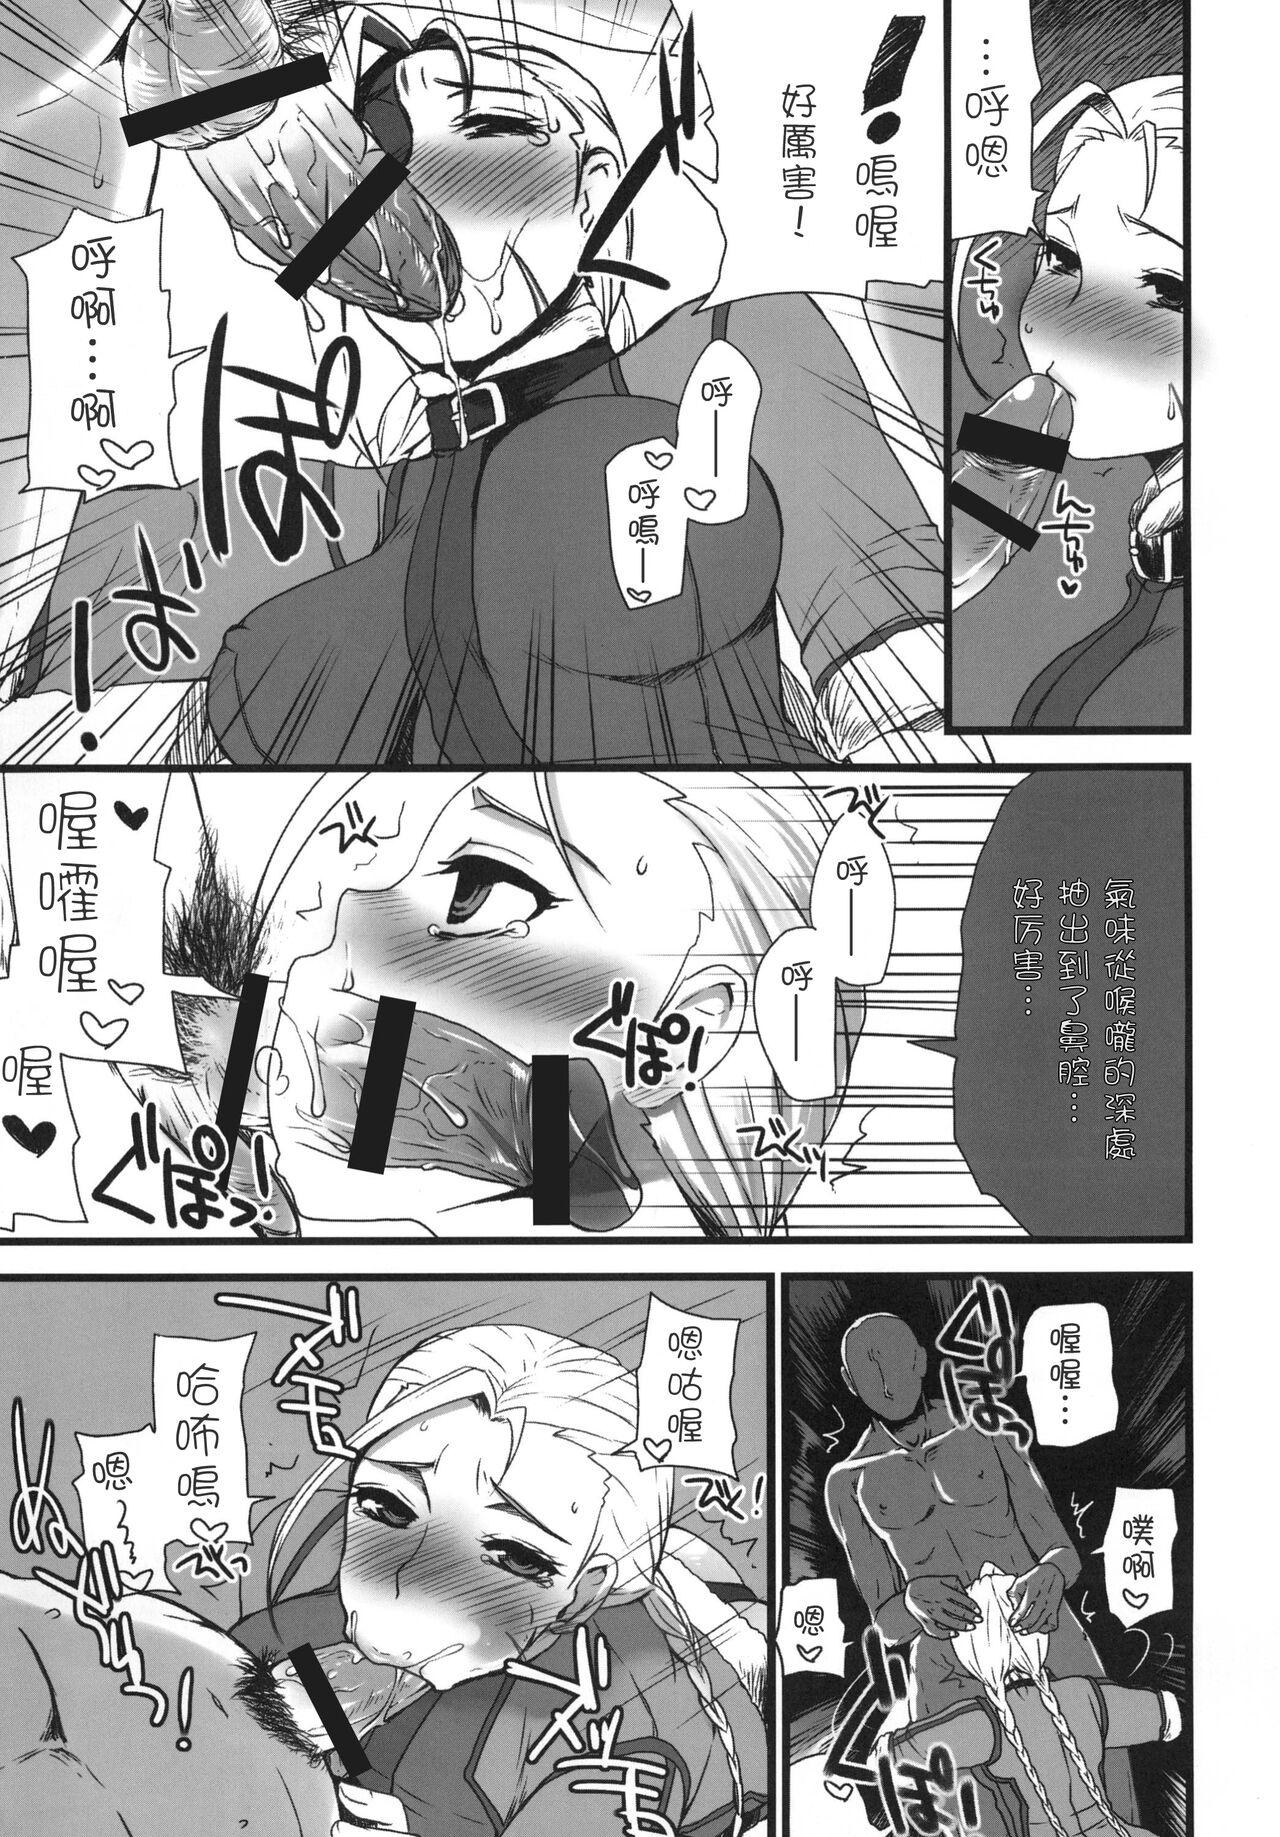 Gay Baitbus Mona-Lisa Overdrive | 重啟蒙娜麗莎 - Street fighter Tied - Page 7